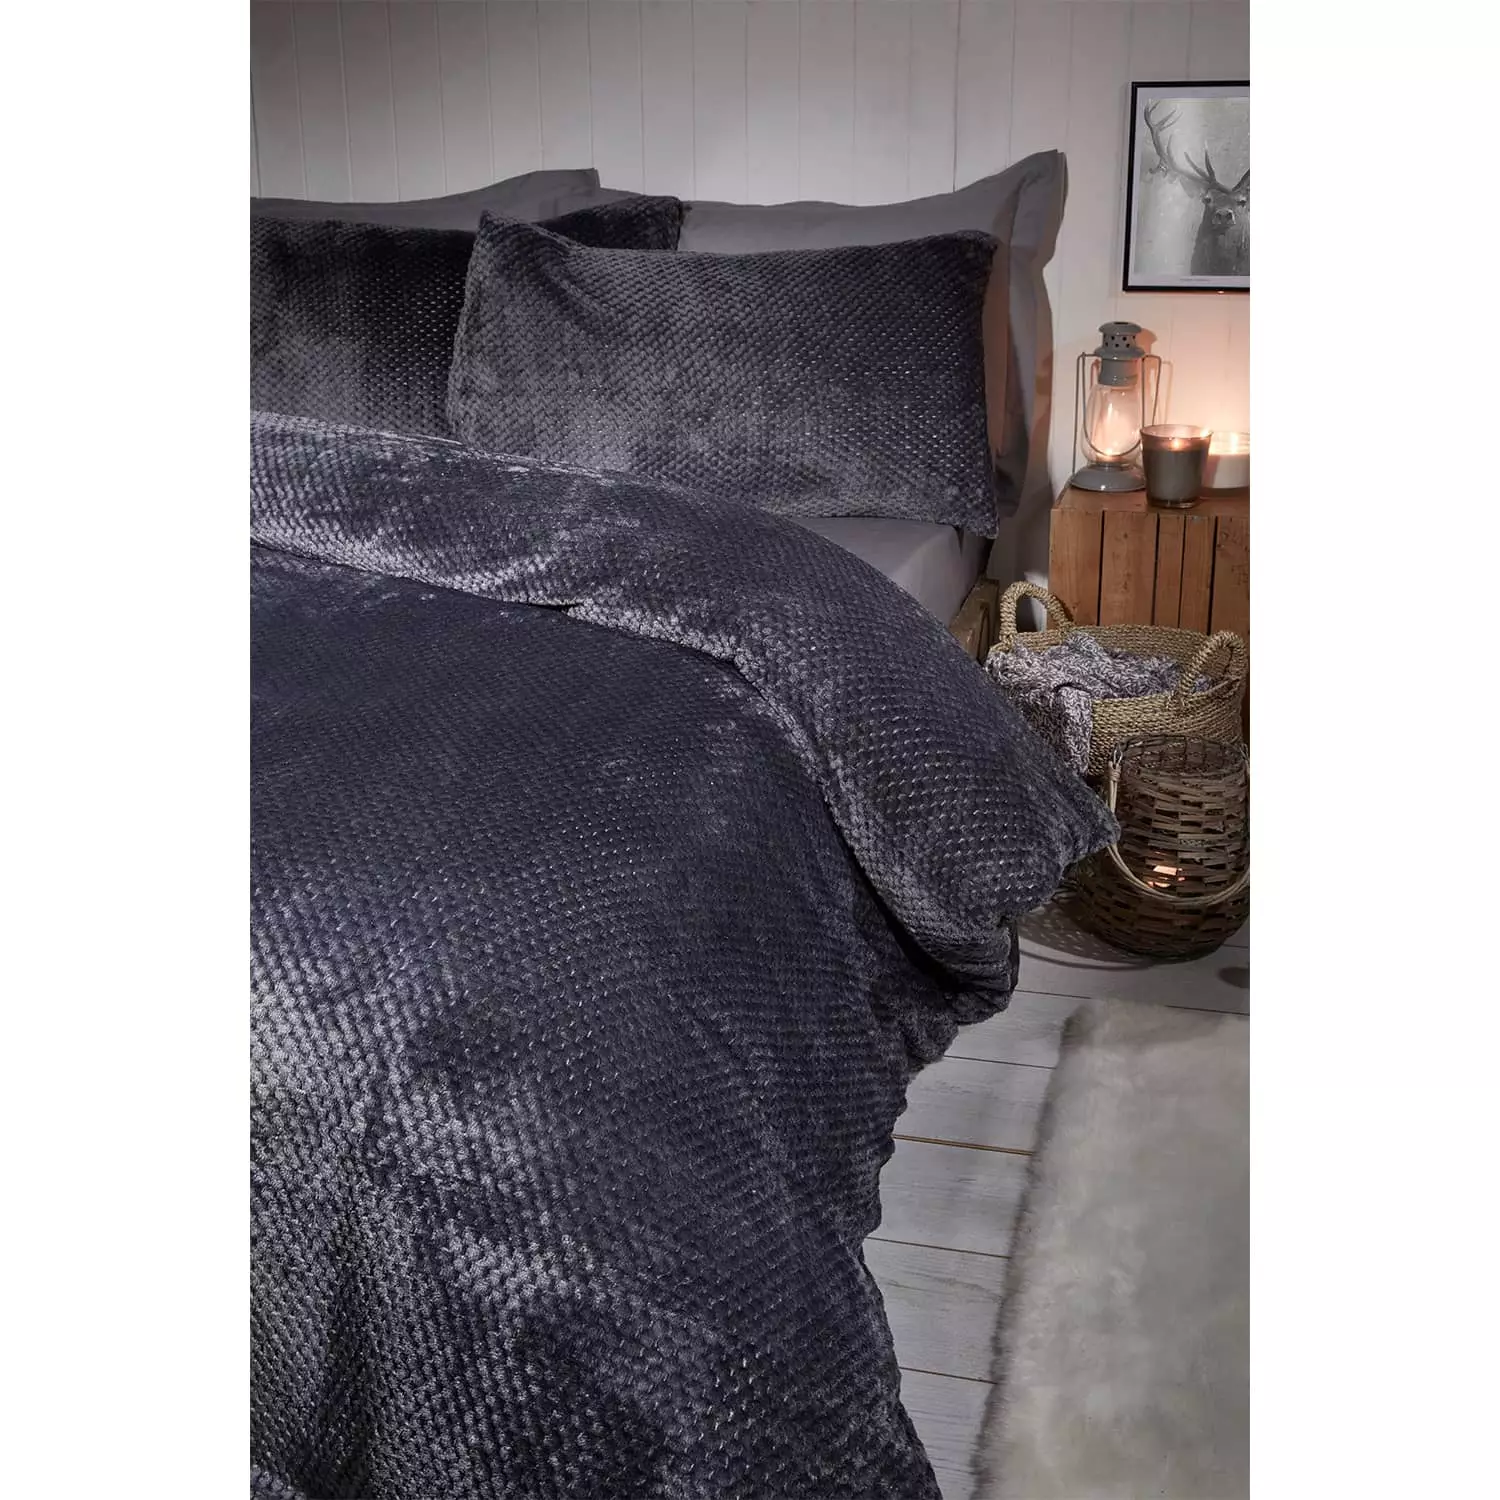 B&M's fleecy duvets are perfect for a cold winter night (